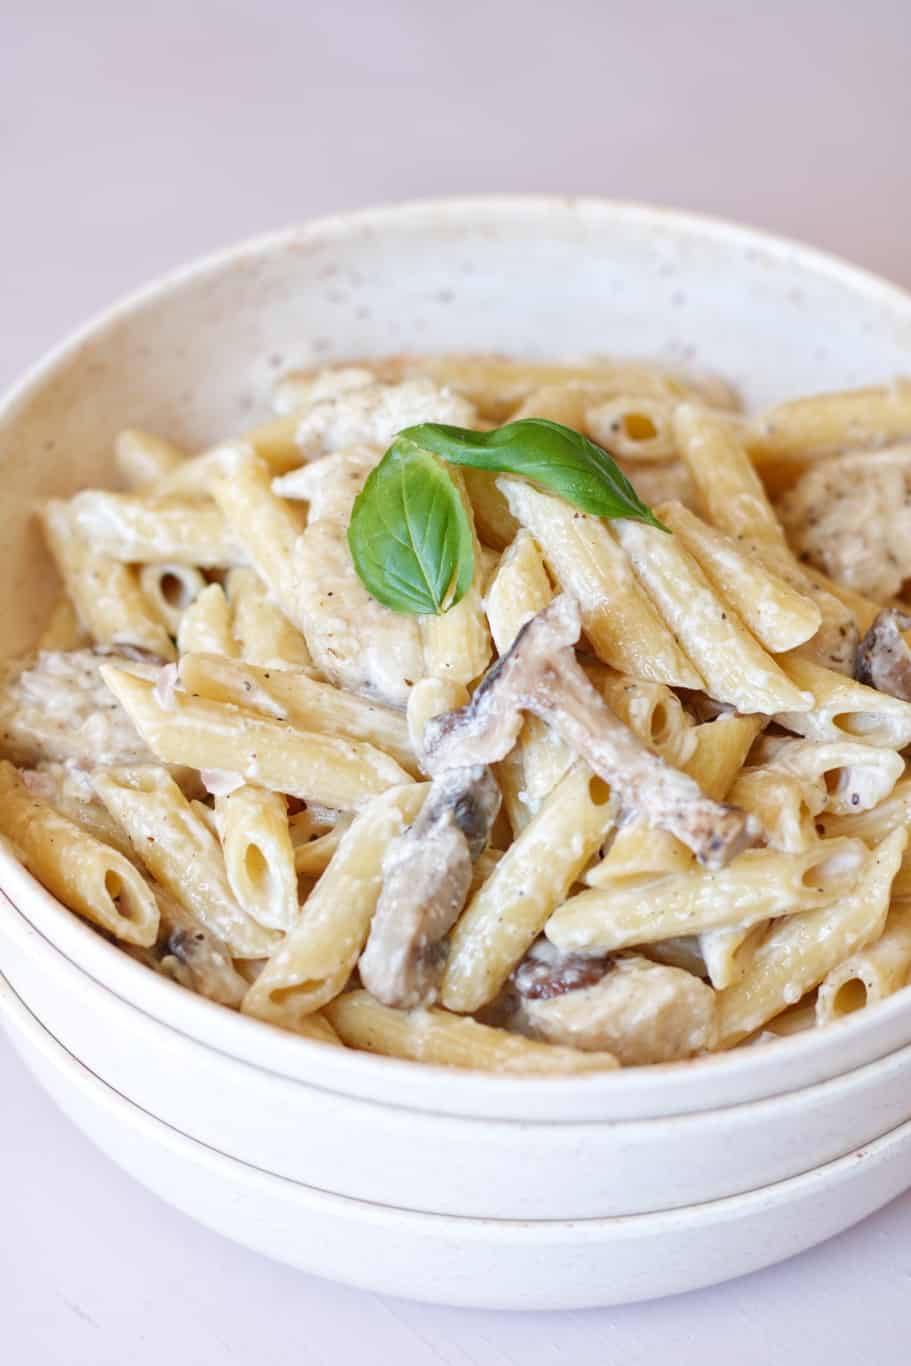 a creamy and cheesy bowl of pasta da vinchi with mushrooms, garlic, and caramelized onions